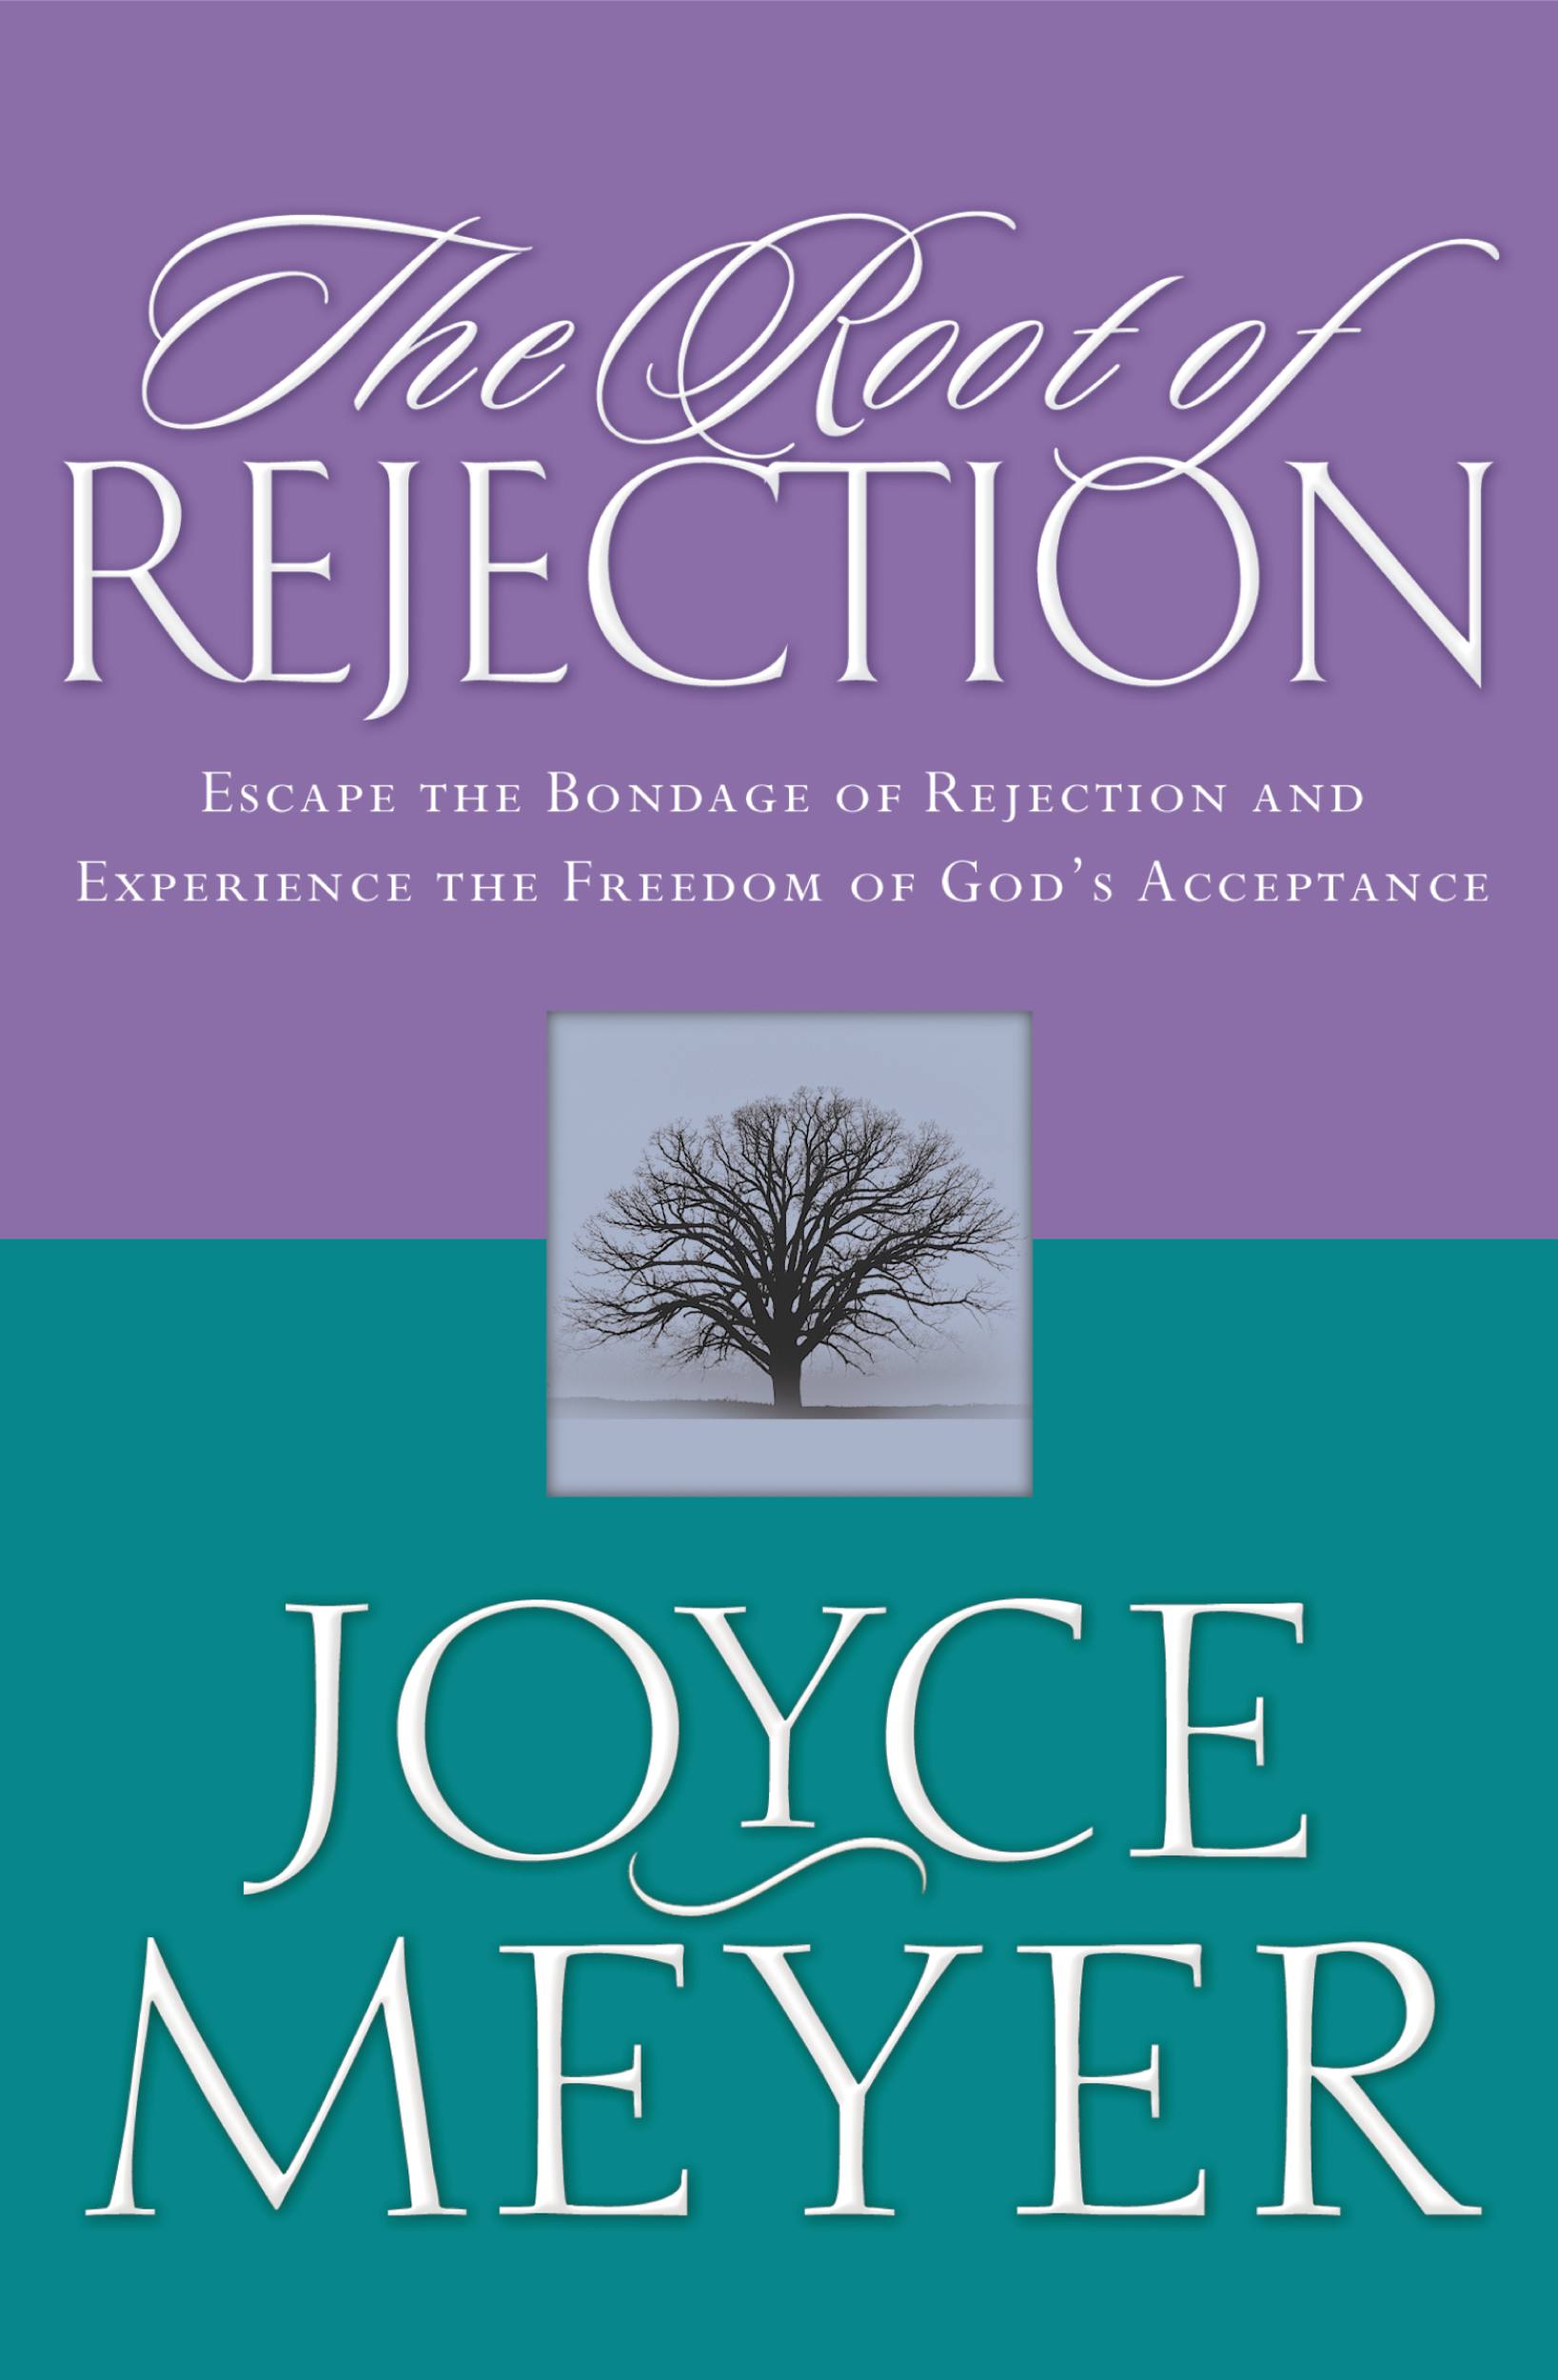 Umschlagbild für The Root of Rejection [electronic resource] : Escape the Bondage of Rejection and Experience the Freedom of God's Acceptance